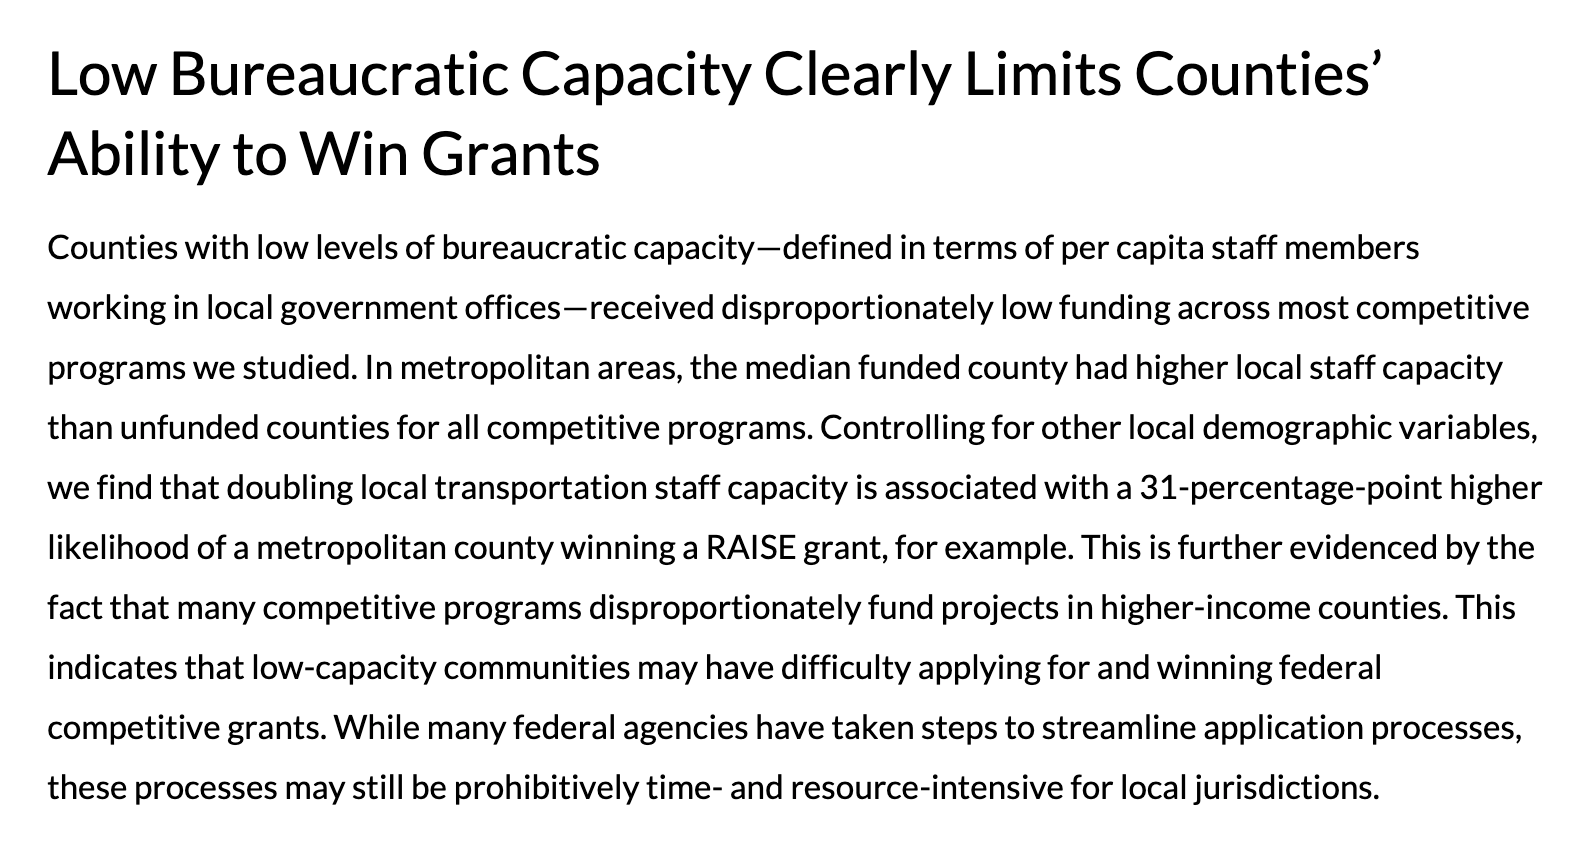 Low Bureaucratic Capacity Clearly Limits Counties’ Ability to Win Grants Counties with low levels of bureaucratic capacity—defined in terms of per capita staff members working in local government offices—received disproportionately low funding across most competitive programs we studied. In metropolitan areas, the median funded county had higher local staff capacity than unfunded counties for all competitive programs. Controlling for other local demographic variables, we find that doubling local transportation staff capacity is associated with a 31-percentage-point higher likelihood of a metropolitan county winning a RAISE grant, for example. This is further evidenced by the fact that many competitive programs disproportionately fund projects in higher-income counties. This indicates that low-capacity communities may have difficulty applying for and winning federal competitive grants. While many federal agencies have taken steps to streamline application processes, these processes may still be prohibitively time- and resource-intensive for local jurisdictions.